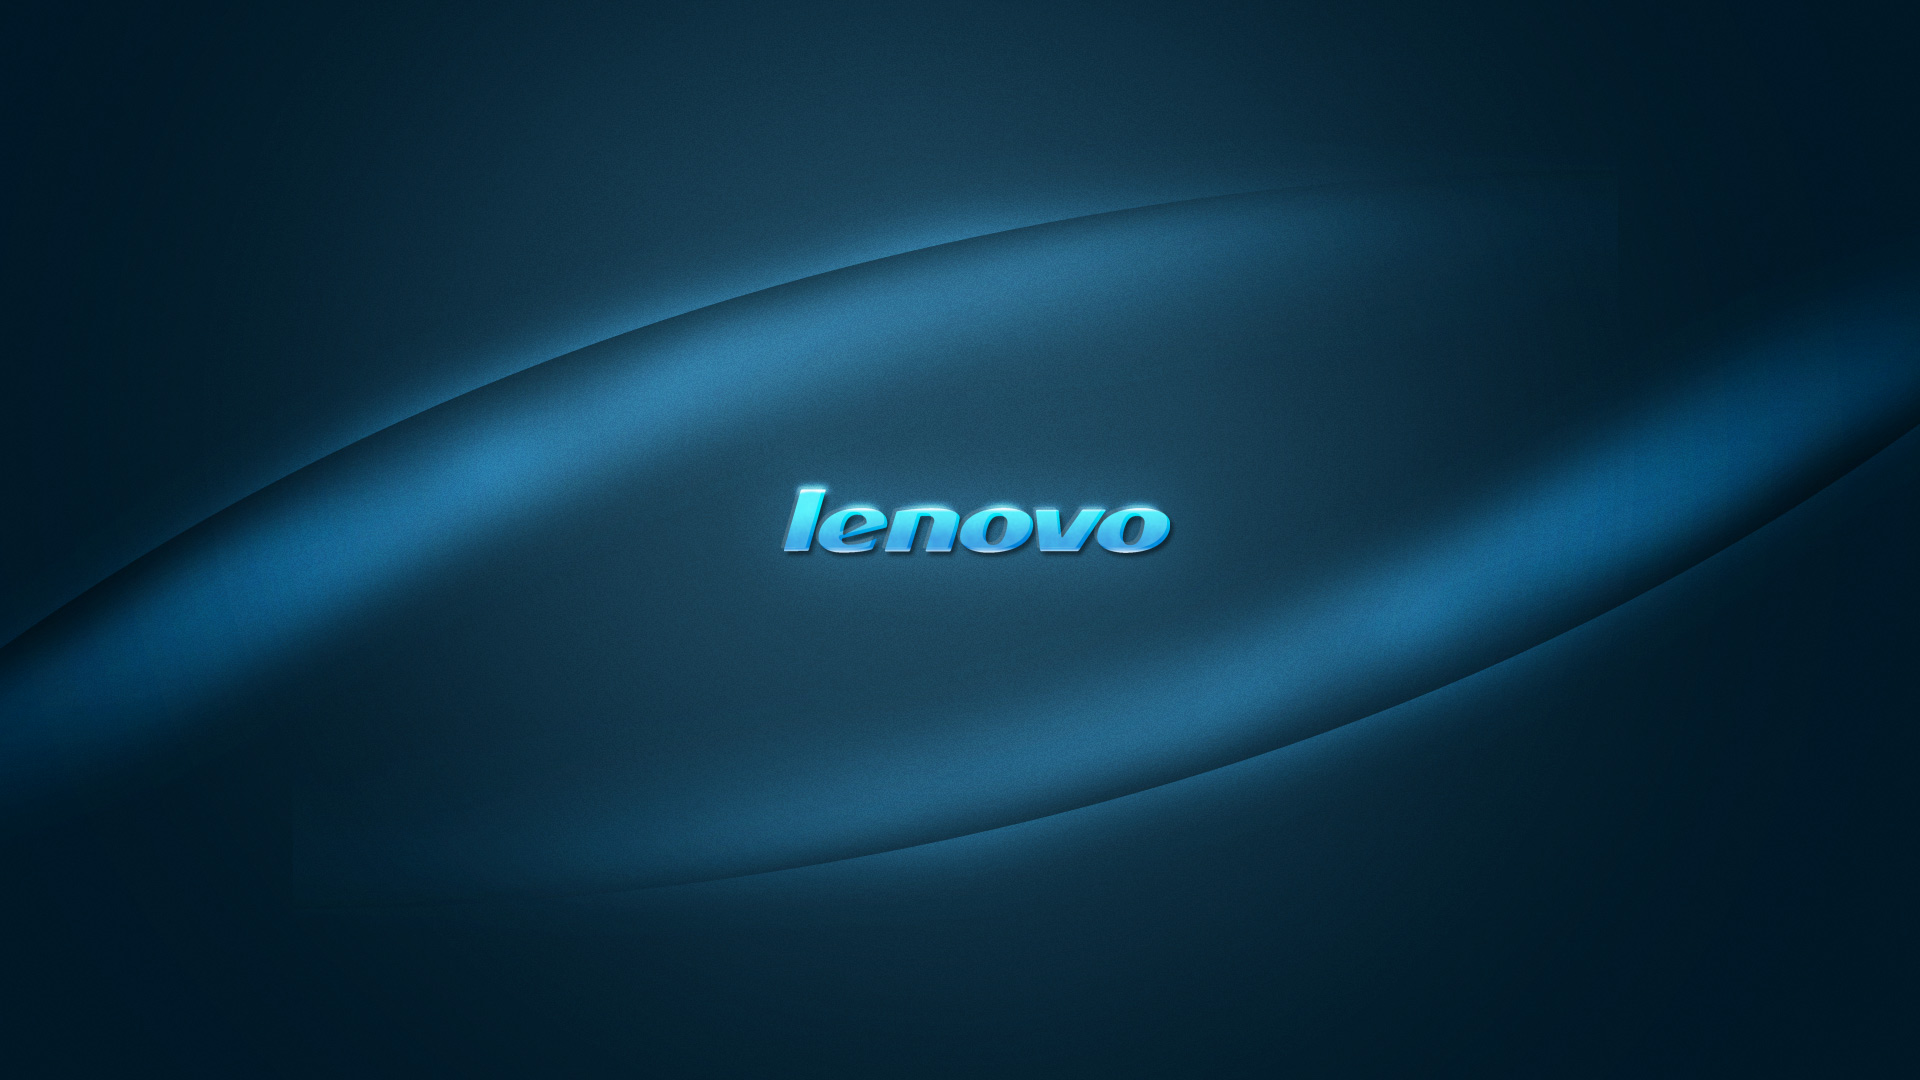 Lenovo Wallpaper HD 1080p By Malkowitch